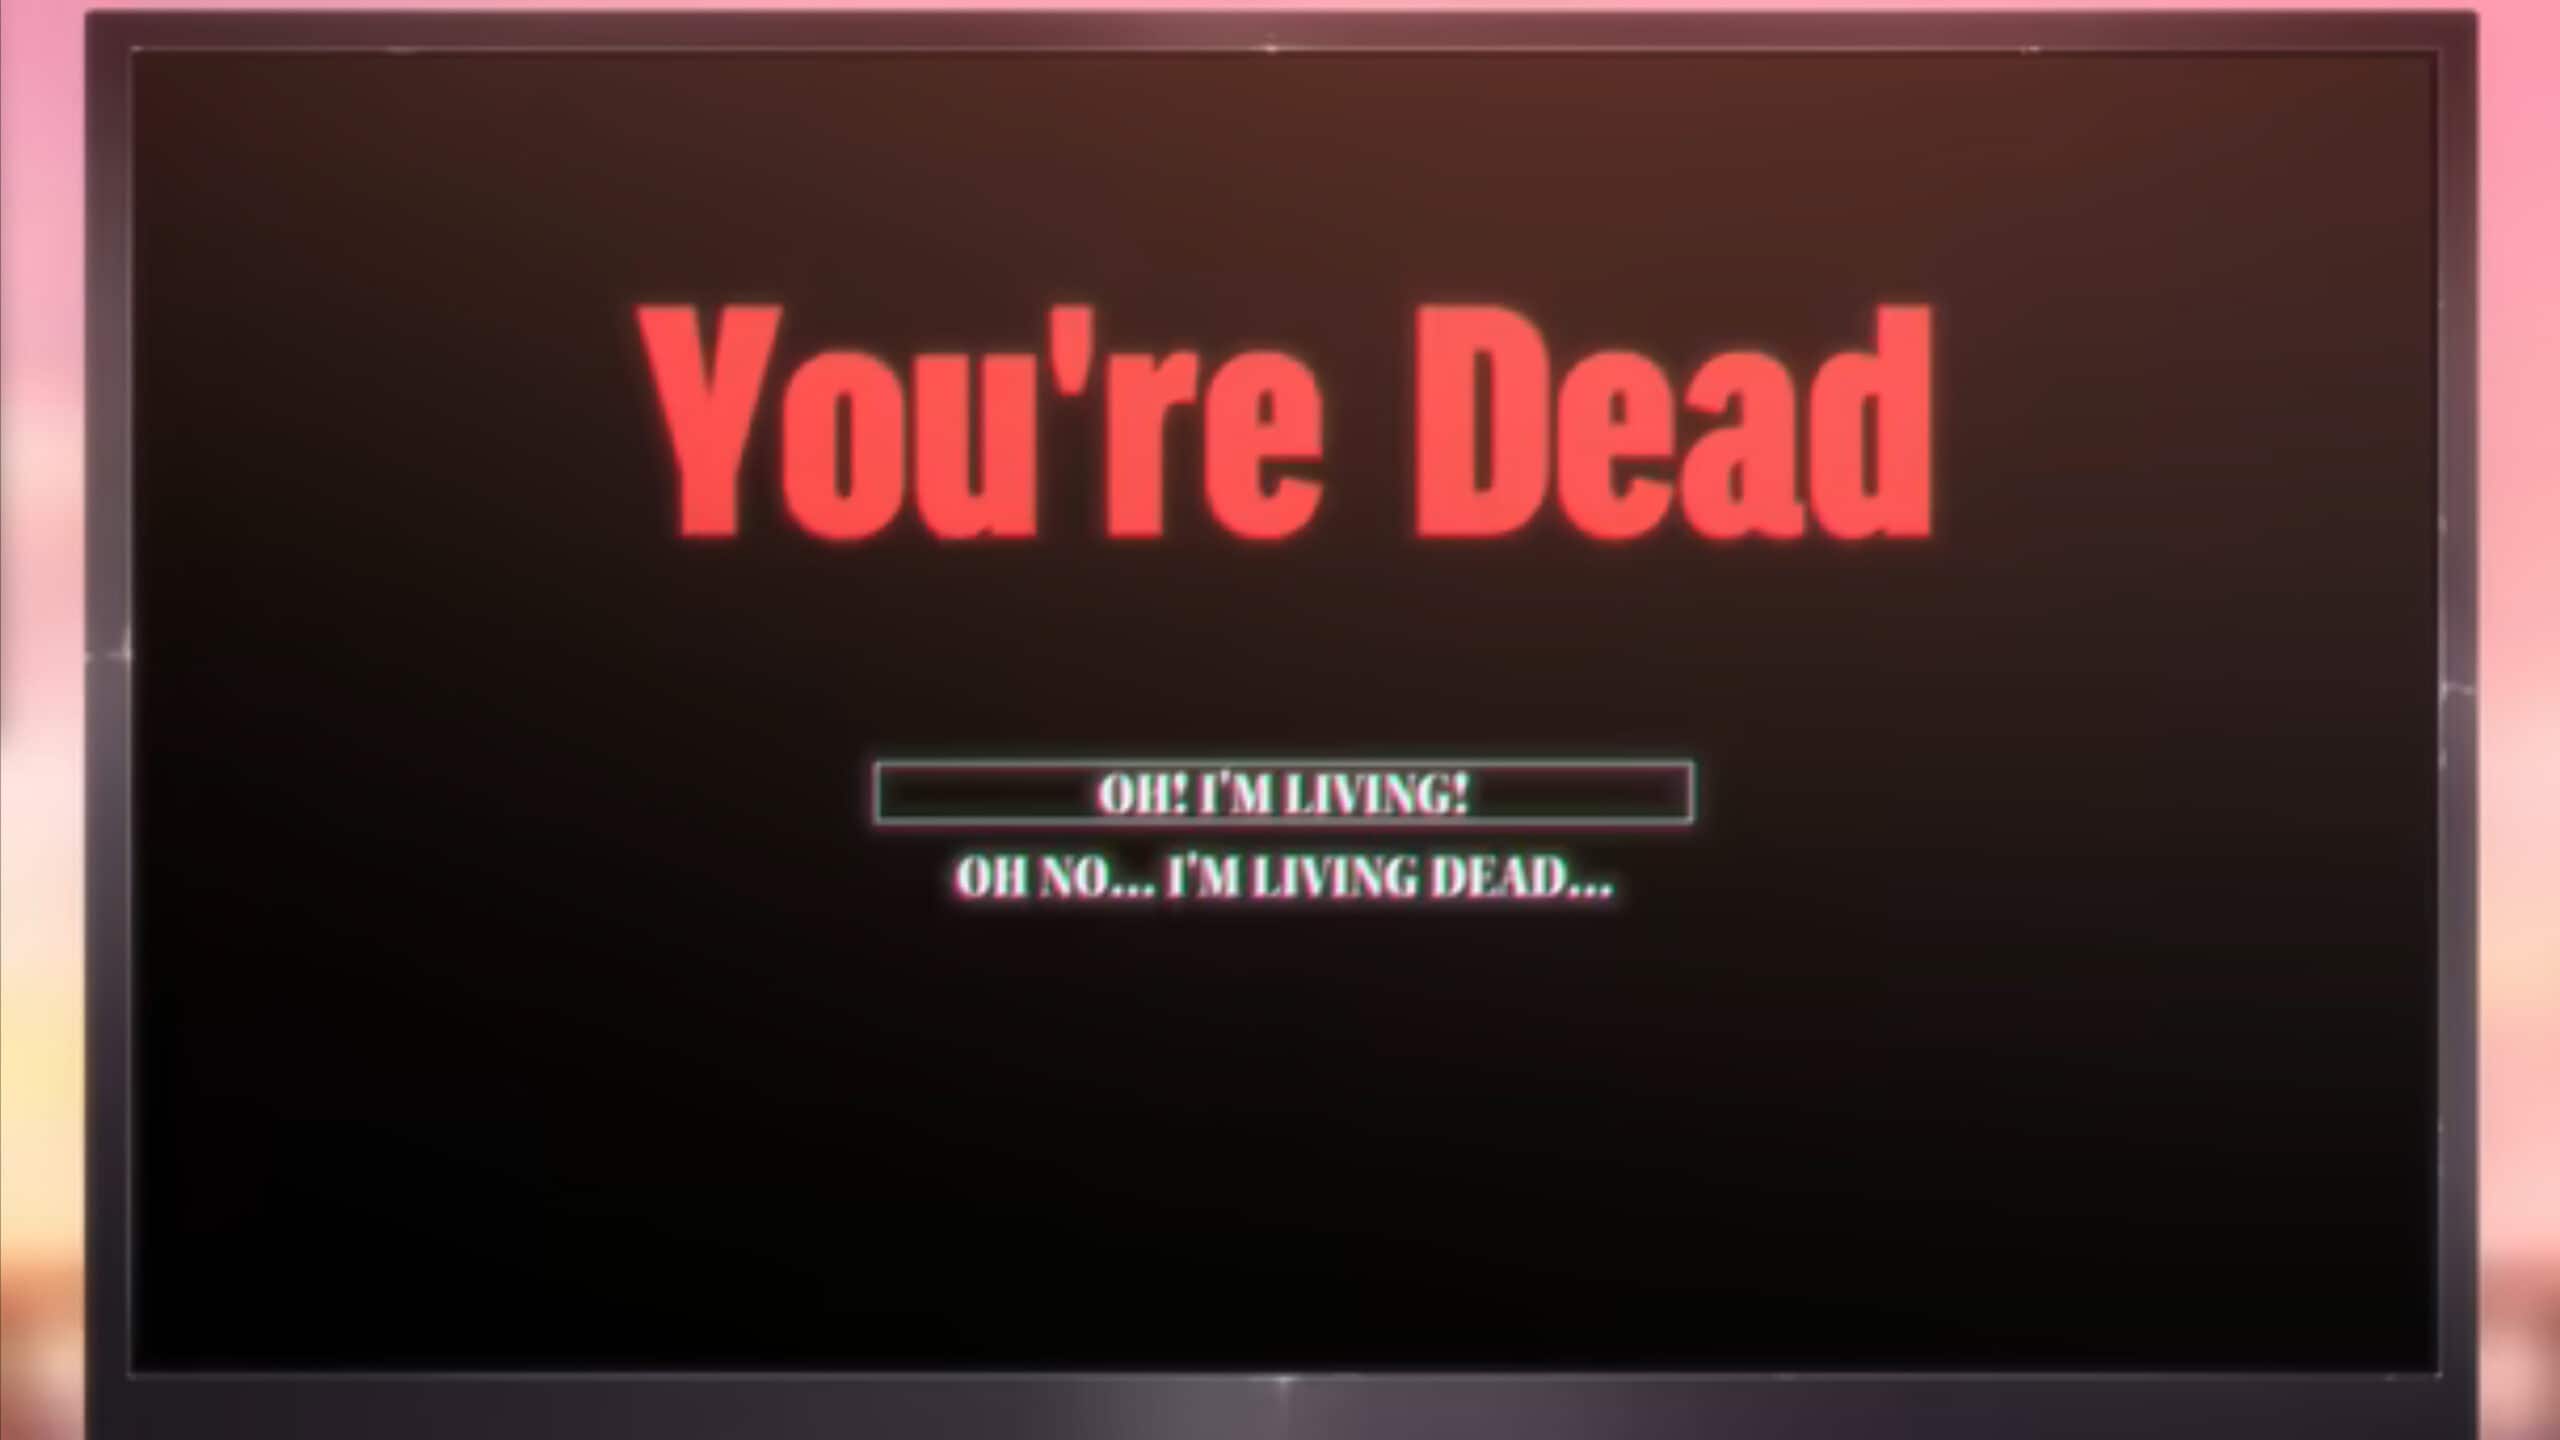 The video game screen of Akari's game, noting he died and asking if he is still alive or the living dead